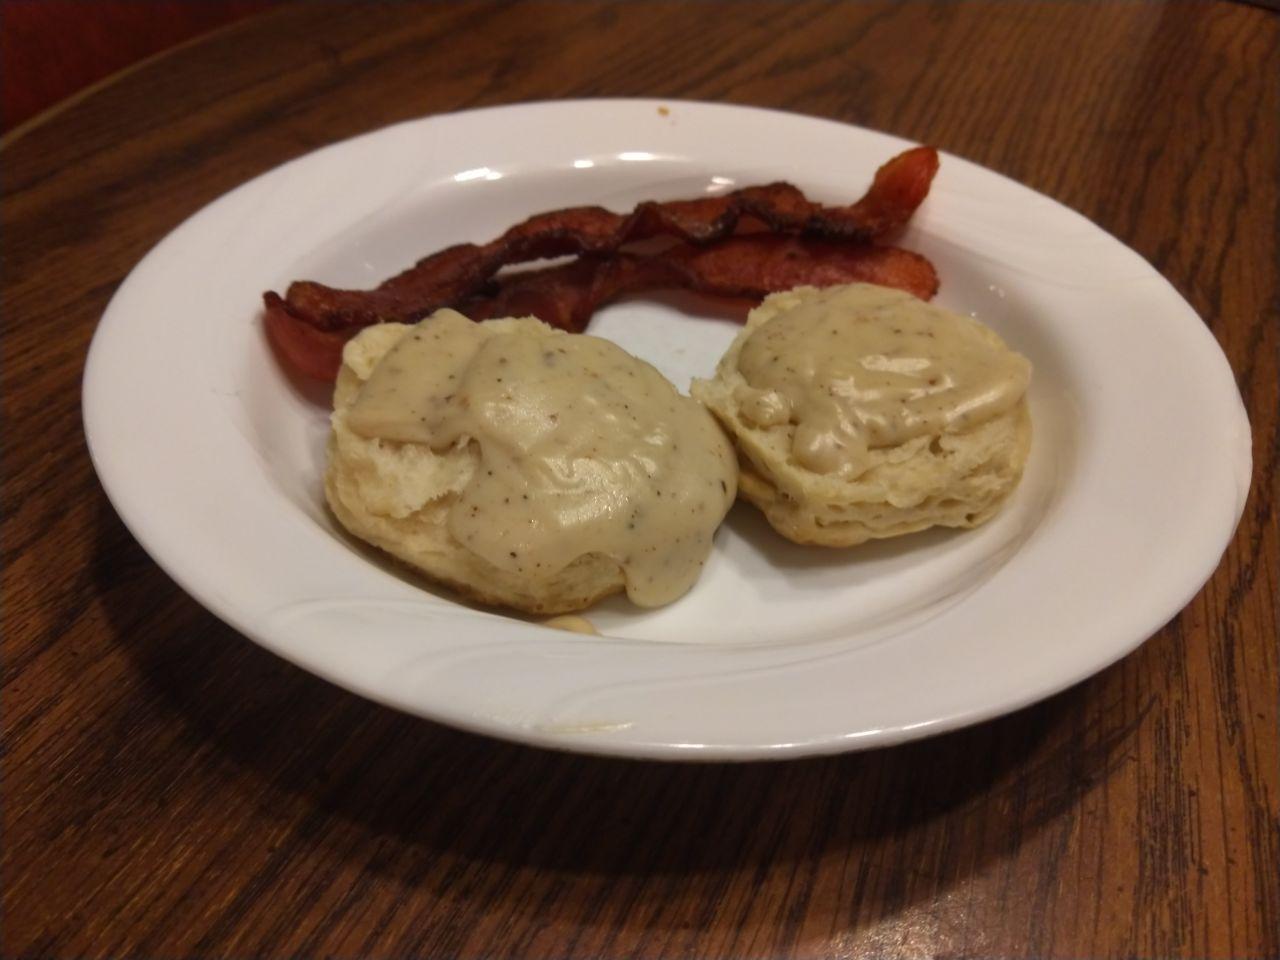 Biscuits and gravy with bacon.